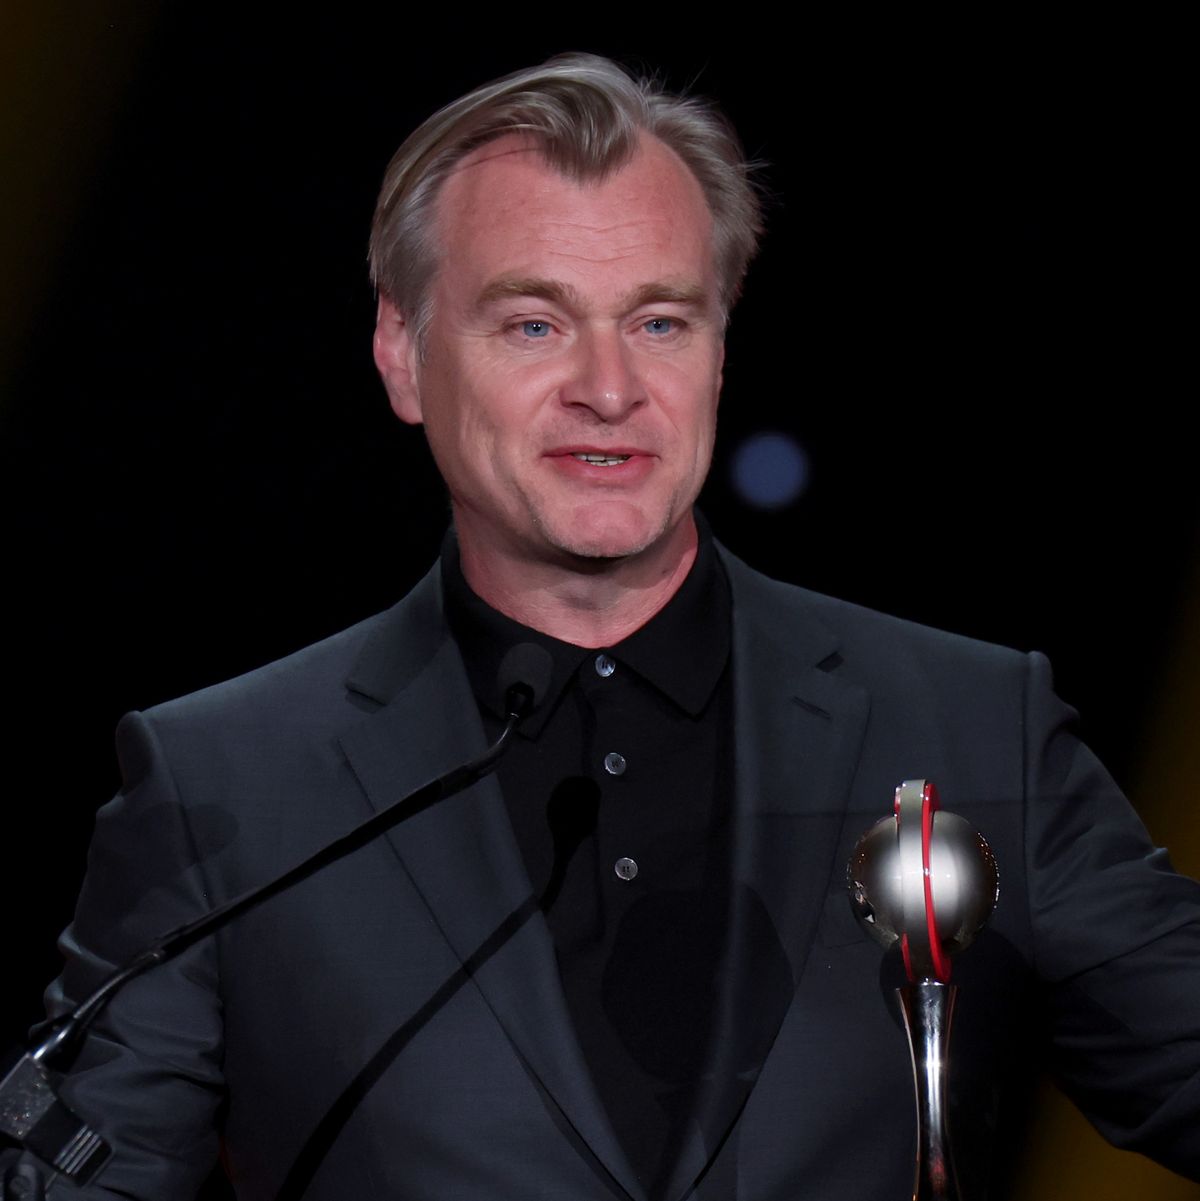 las vegas, nevada april 27 christopher nolan accepts the national association of theatre owners spirit of the industry award during the cinemacon big screen achievement awards at the colosseum at caesars palace during cinemacon, the official convention of the national association of theatre owners, on april 27, 2023 in las vegas, nevada photo by gabe ginsbergwireimage